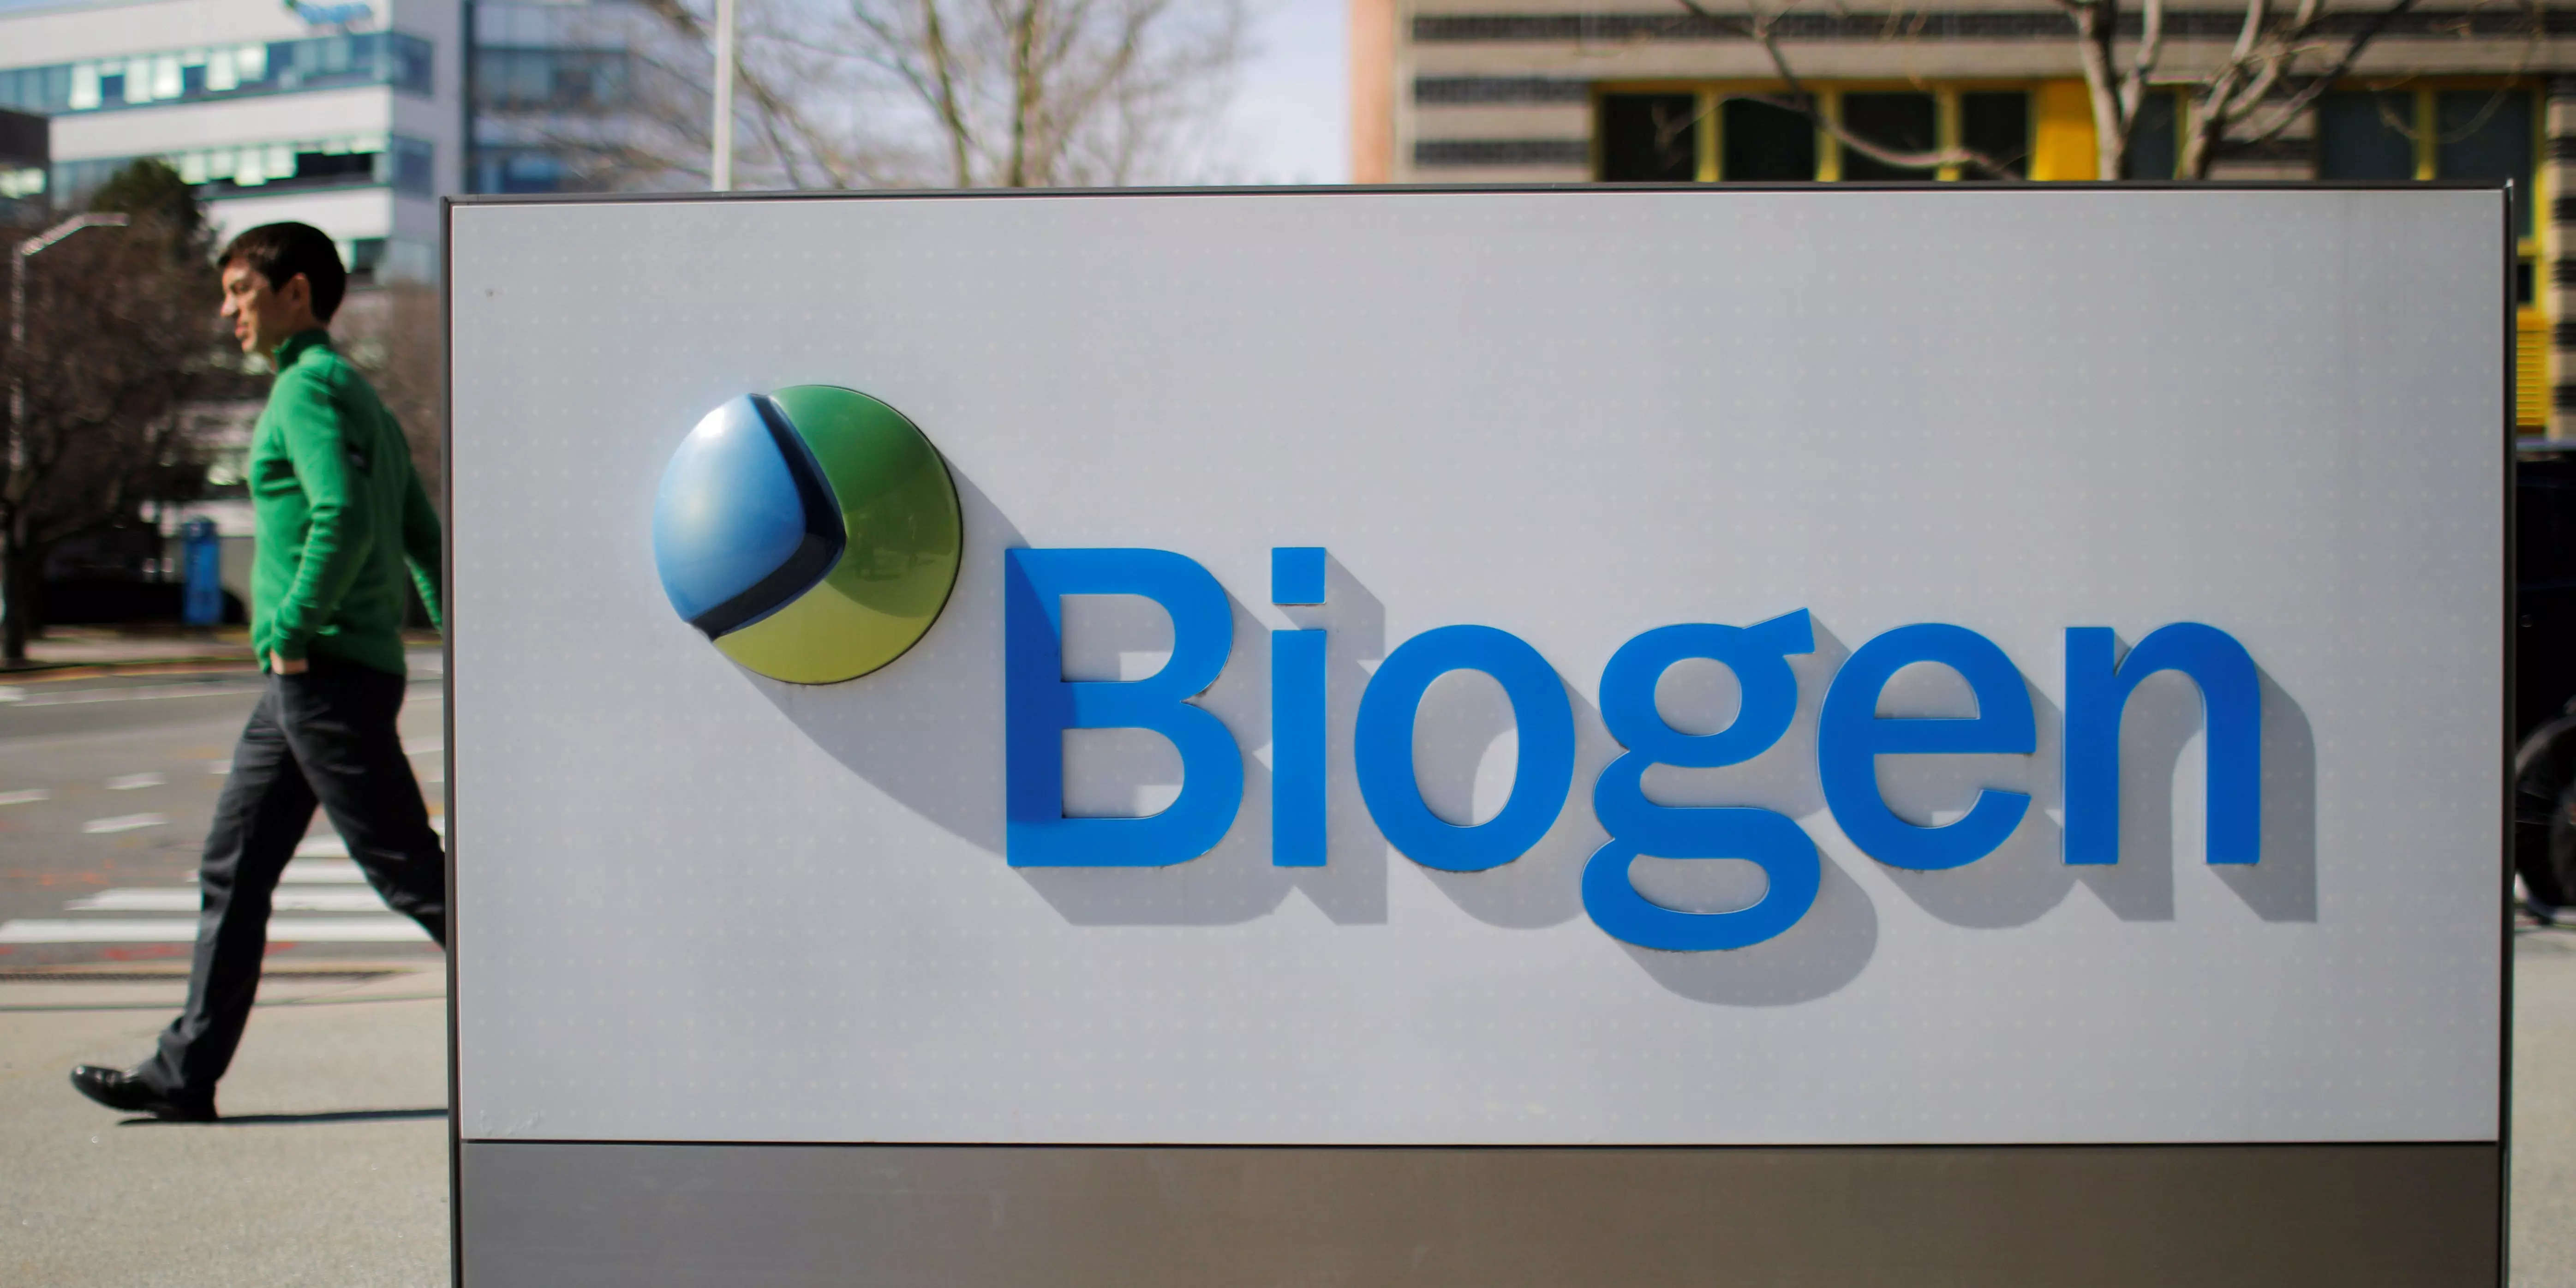 
Biogen soars 13% on report of potential acquisition by South Korea's Samsung Group
